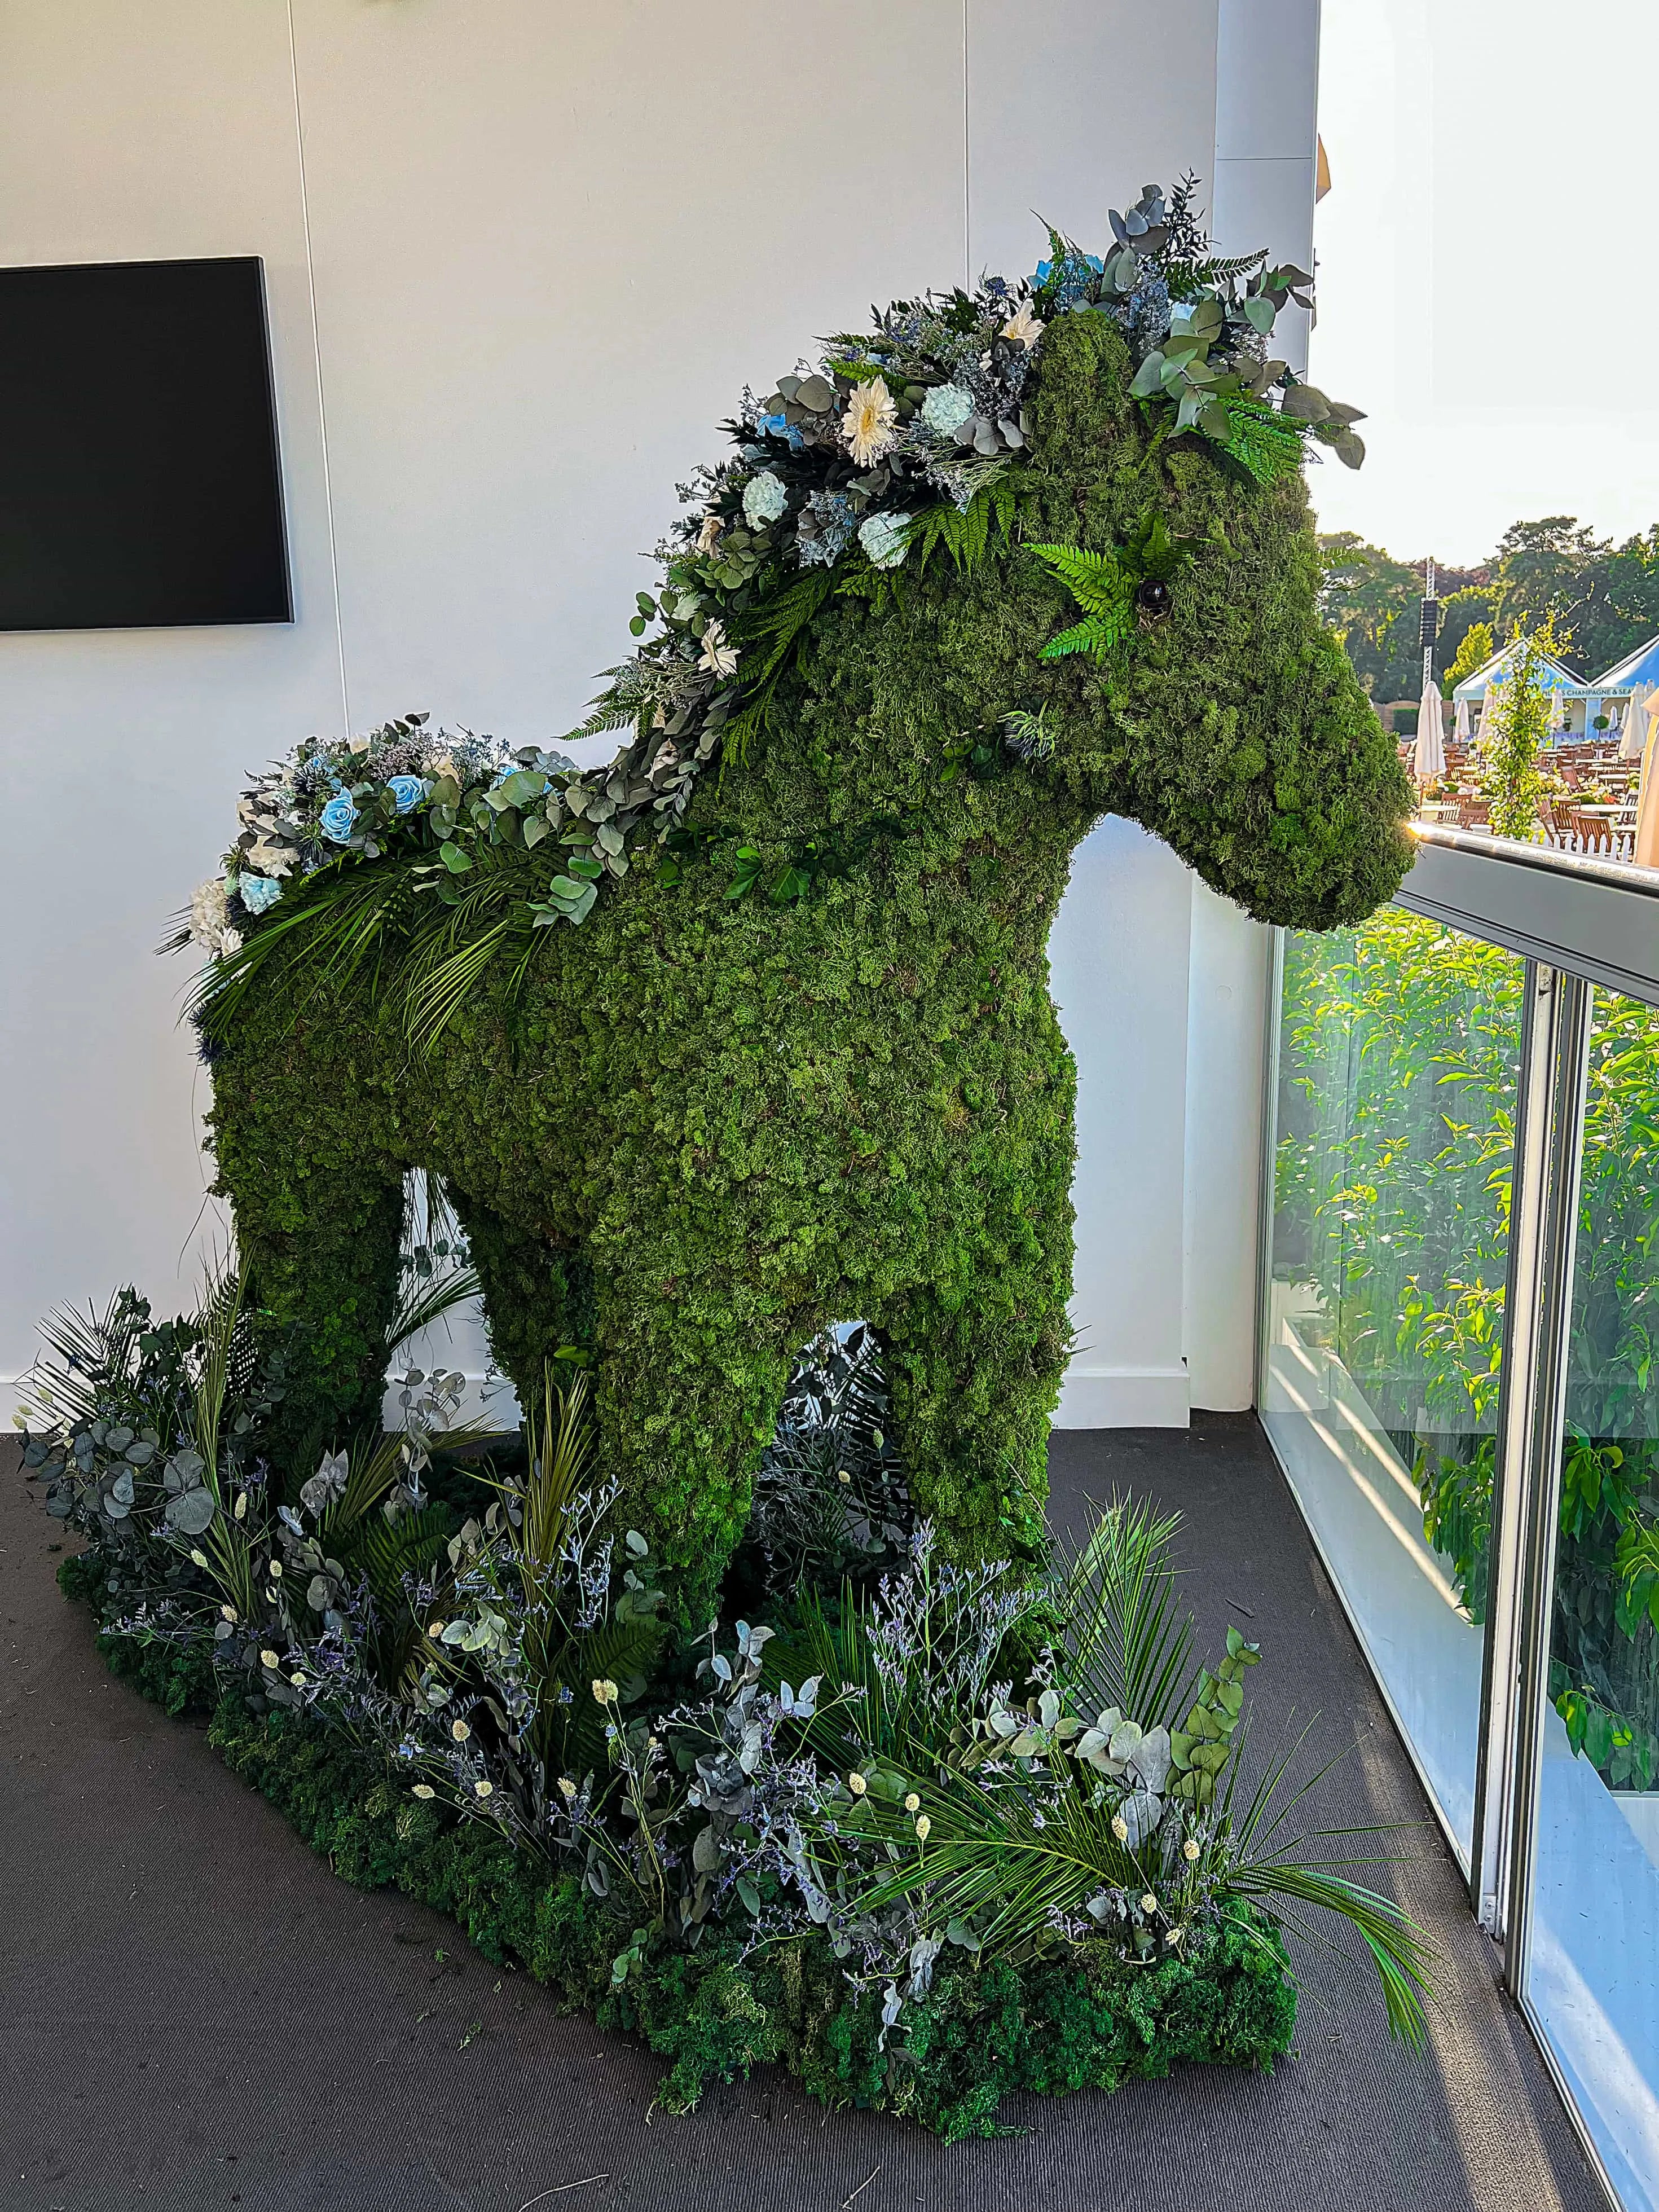 For their prestigious event, Royal Ascot required an event florist to transform areas of their event with beautiful floral installations unique to them